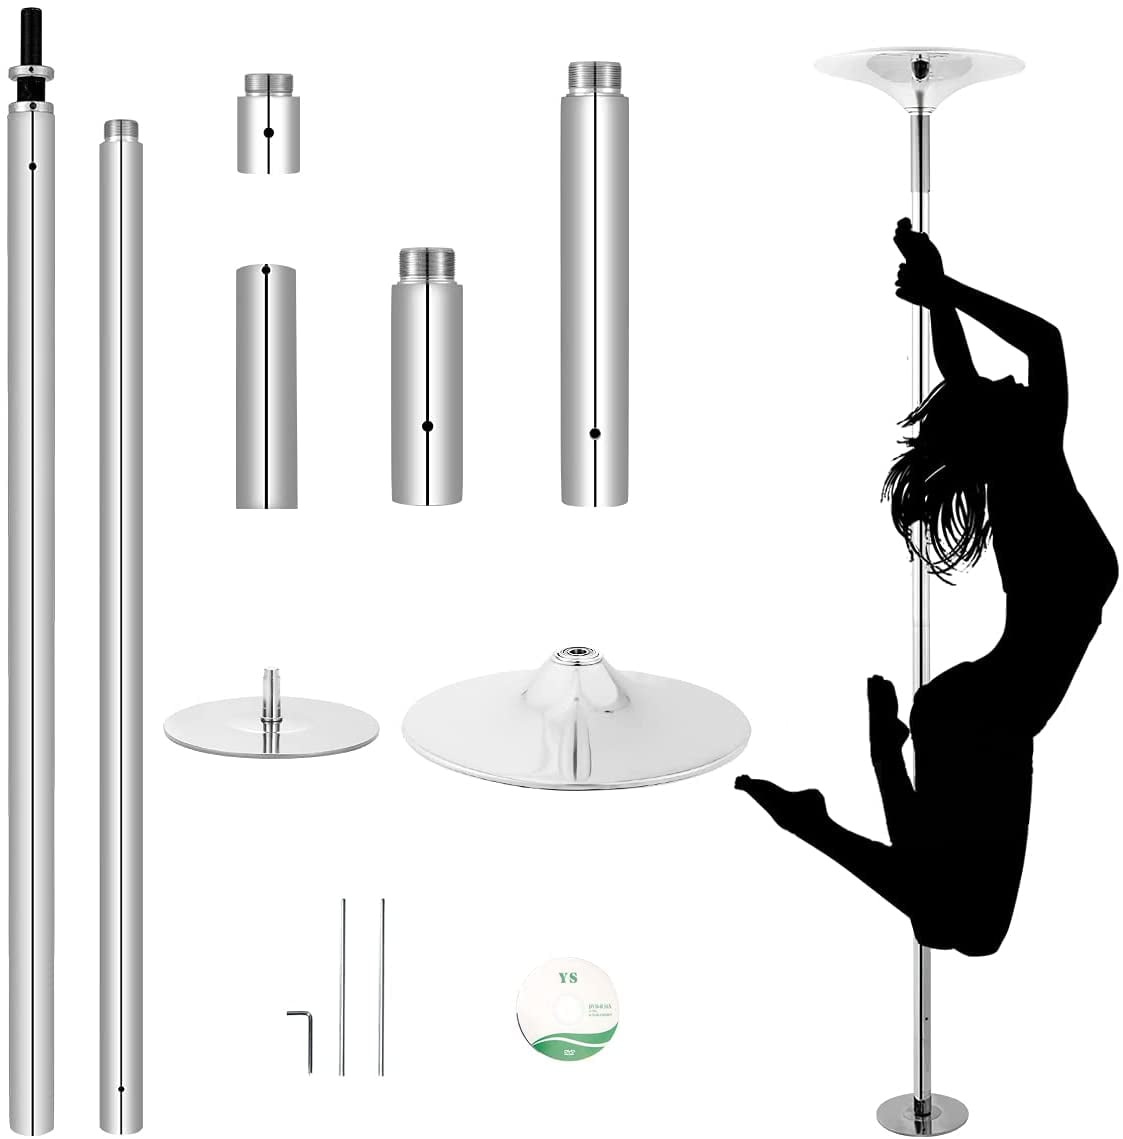 Portable Removable Pole Kit for Home Club Gym Bar Silver YOLENY Dancing Pole Spinning Static Pole Dance with Adjustable Height 